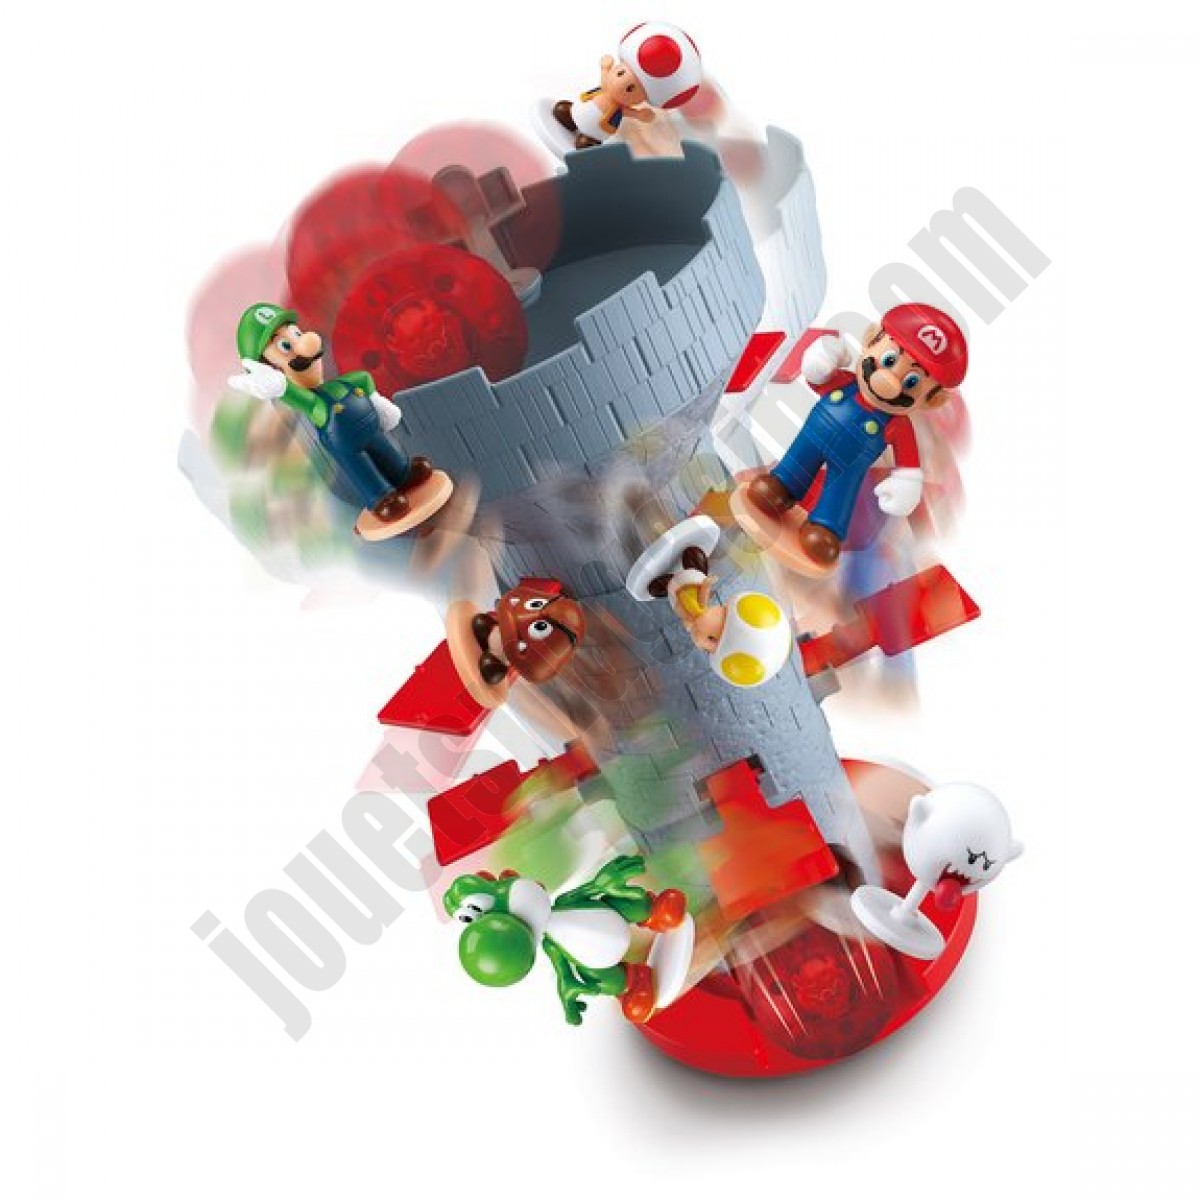 Super Mario Blow Up! Shaky Tower En promotion - Super Mario Blow Up! Shaky Tower En promotion